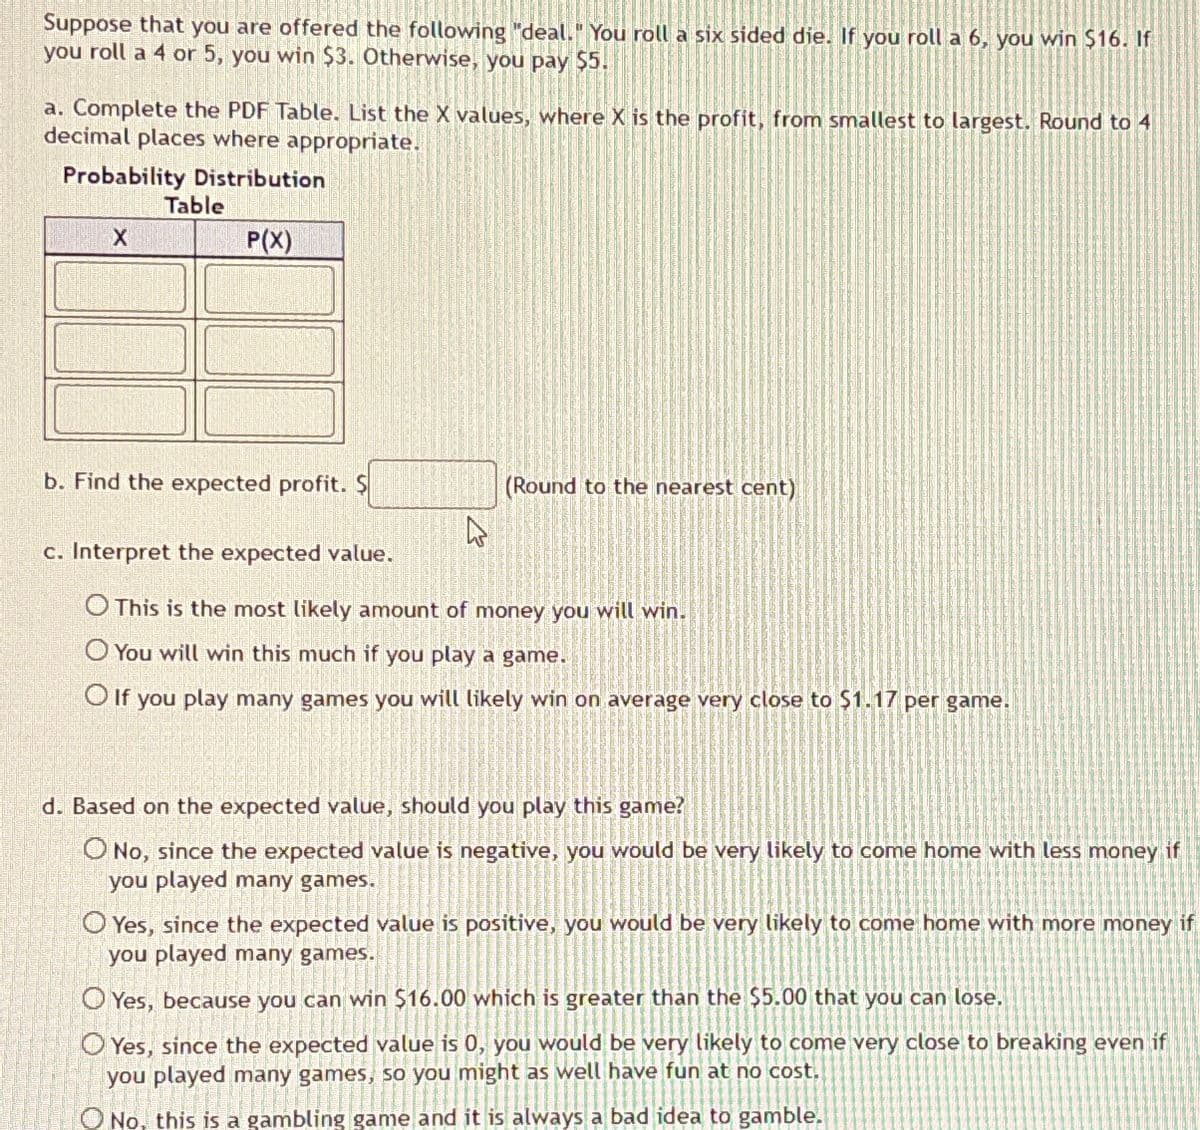 Suppose that you are offered the following "deal." You roll a six sided die. If you roll a 6, you win $16. If
you roll a 4 or 5, you win $3. Otherwise, you pay $5.
a. Complete the PDF Table. List the X values, where X is the profit, from smallest to largest. Round to 4
decimal places where appropriate.
Probability Distribution
Table
X
P(X)
b. Find the expected profit. $
(Round to the nearest cent)
c. Interpret the expected value.
This is the most likely amount of money you will win.
You will win this much if you play a game.
If you play many games you will likely win on average very close to $1.17 per game.
d. Based on the expected value, should you play this game?
No, since the expected value is negative, you would be very likely to come home with less money if
you played many games.
Yes, since the expected value is positive, you would be very likely to come home with more money if
you played many games.
Yes, because you can win $16.00 which is greater than the $5.00 that you can lose.
Yes, since the expected value is 0, you would be very likely to come very close to breaking even if
you played many games, so you might as well have fun at no cost.
No, this is a gambling game and it is always a bad idea to gamble.